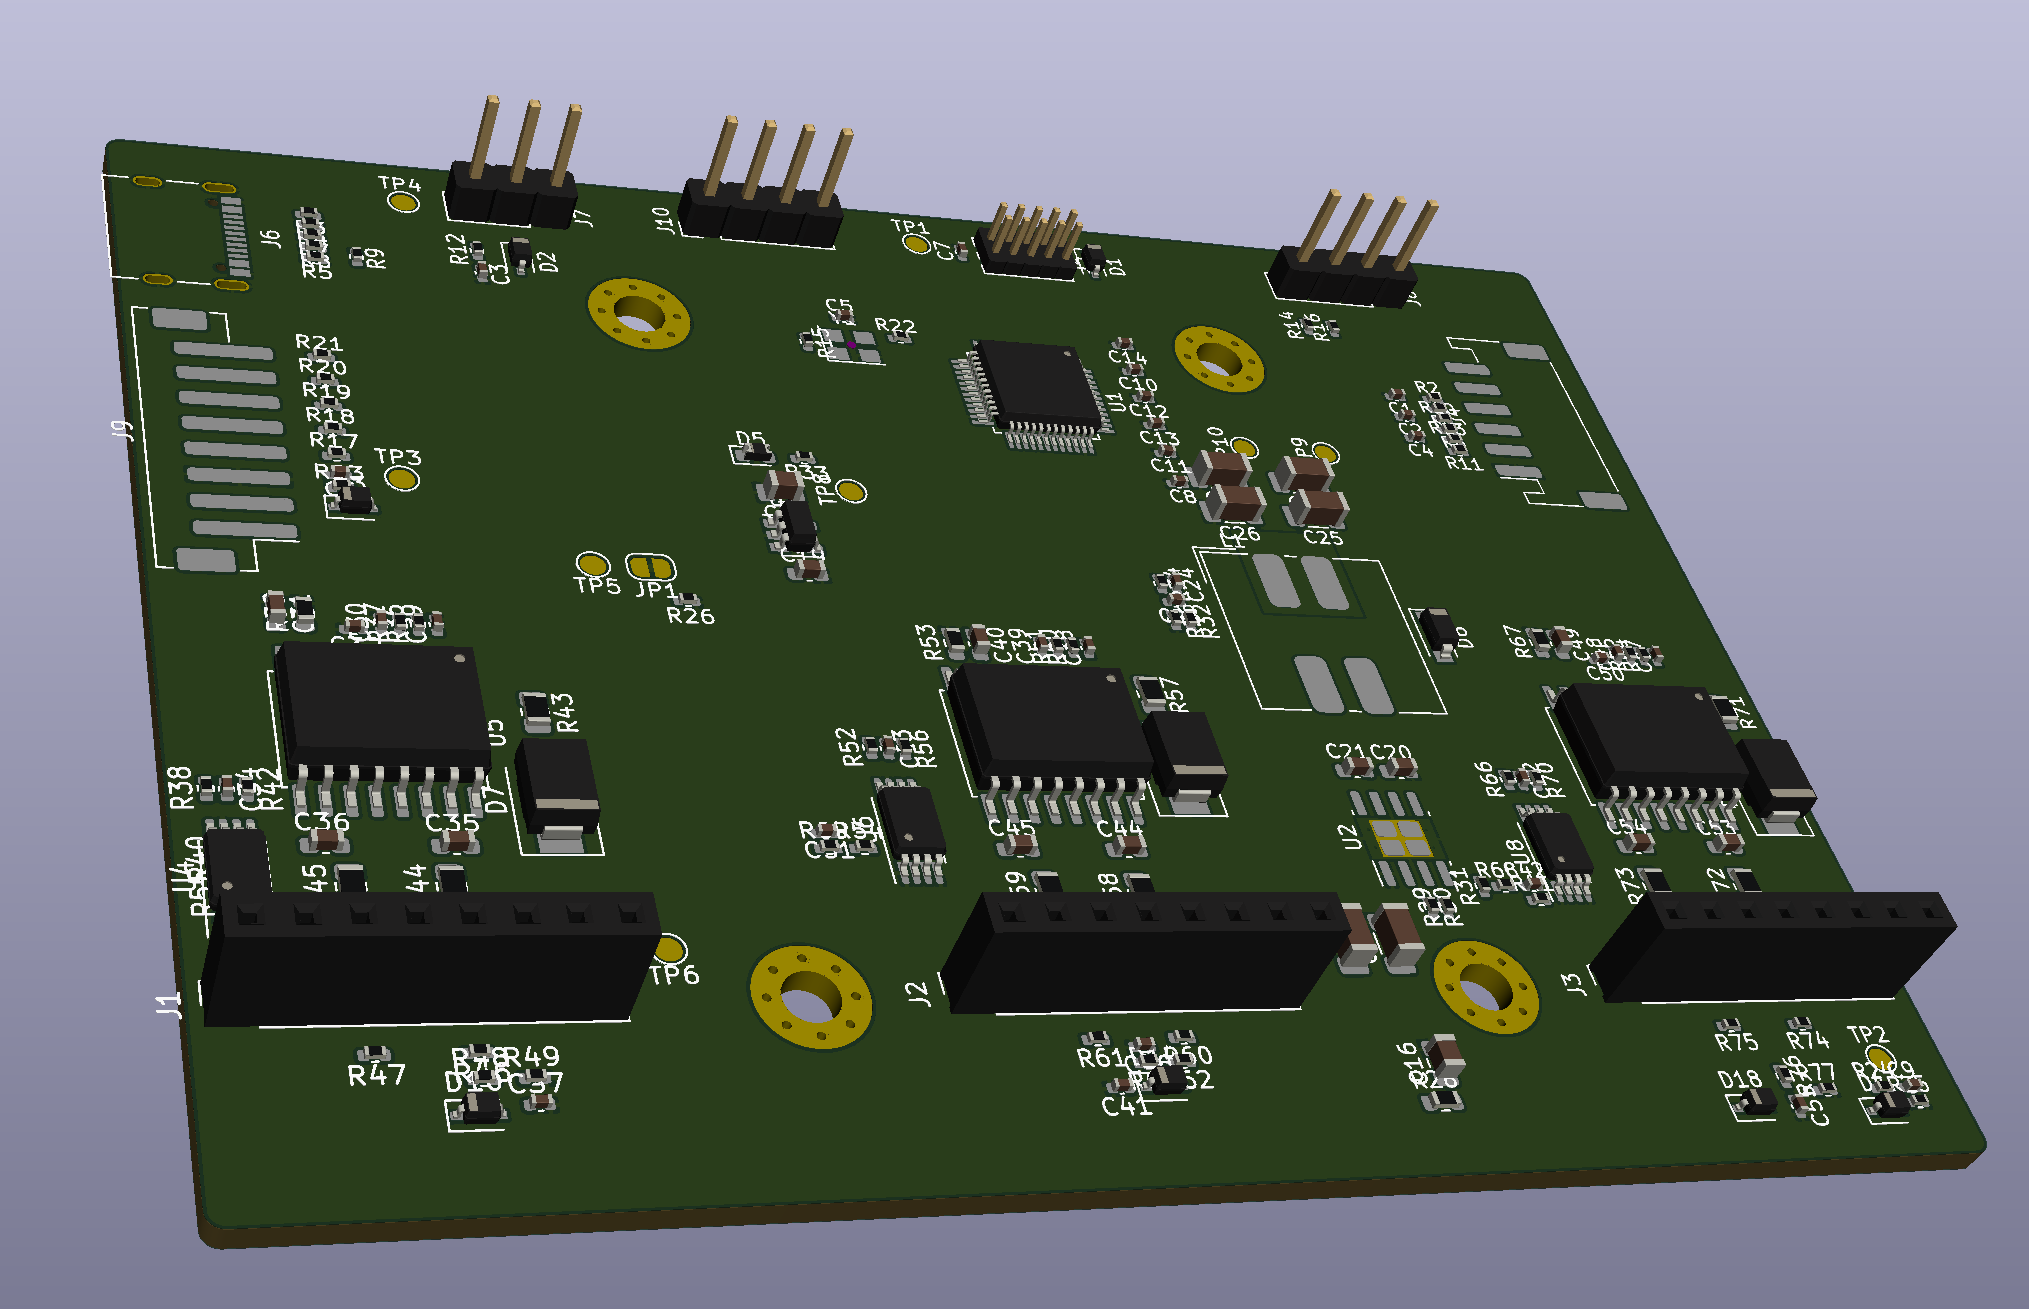 An initial 3D render of the board.